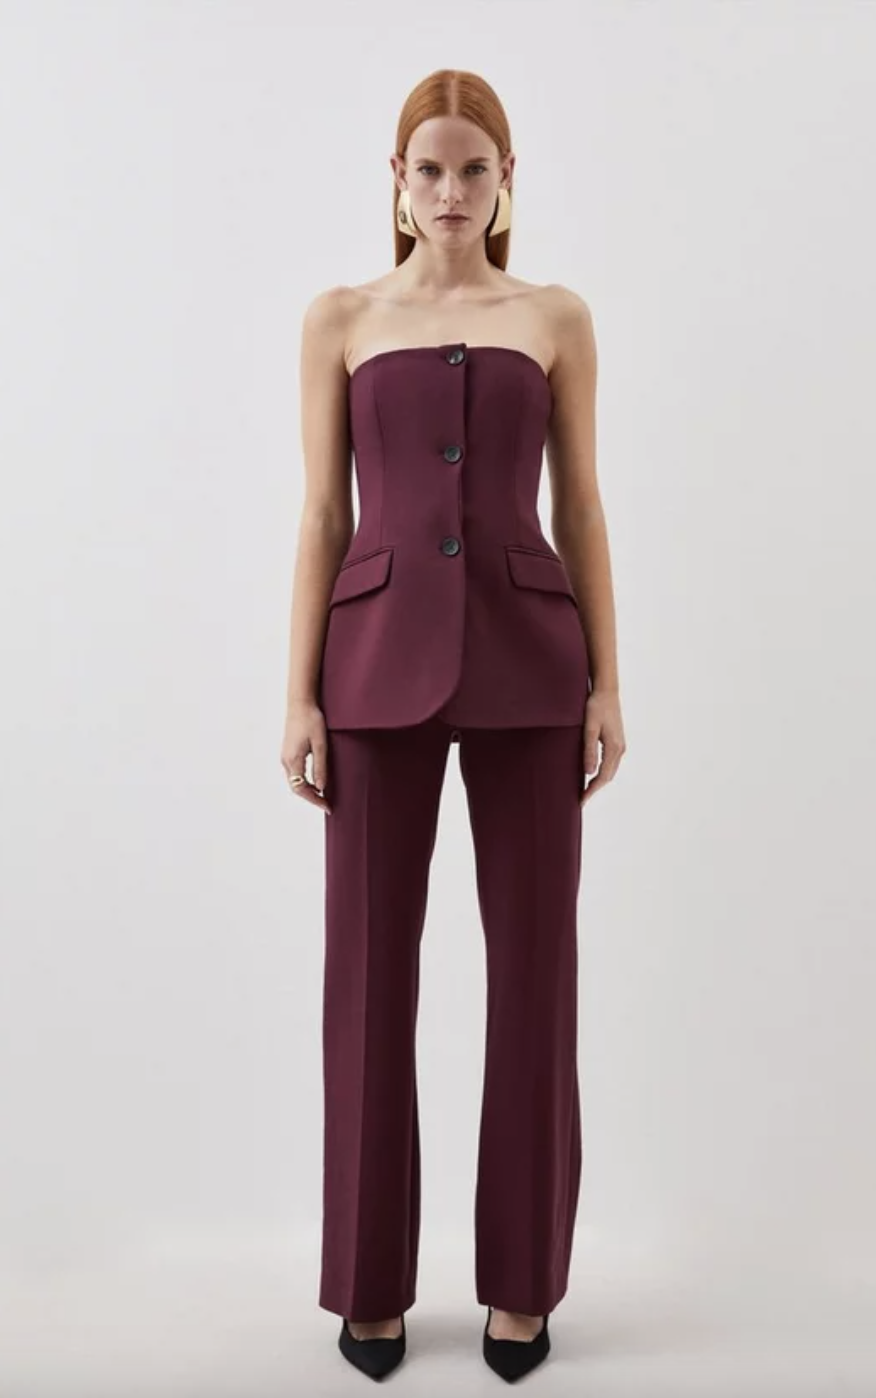 <p><strong>£159.20</strong></p><p><a href="https://www.karenmillen.com/compact-stretch-tailored-button-bodice-jumpsuit/BKK05804.html">Shop Now</a></p><p>Meet your new events staple. We love the strapless bandeau bodice with flared trousers combo. Not forgetting that gorgeous dark purple colour, dreamy! Glam it TF up with sparkly shoes and piles of jewellery for a wedding. </p>